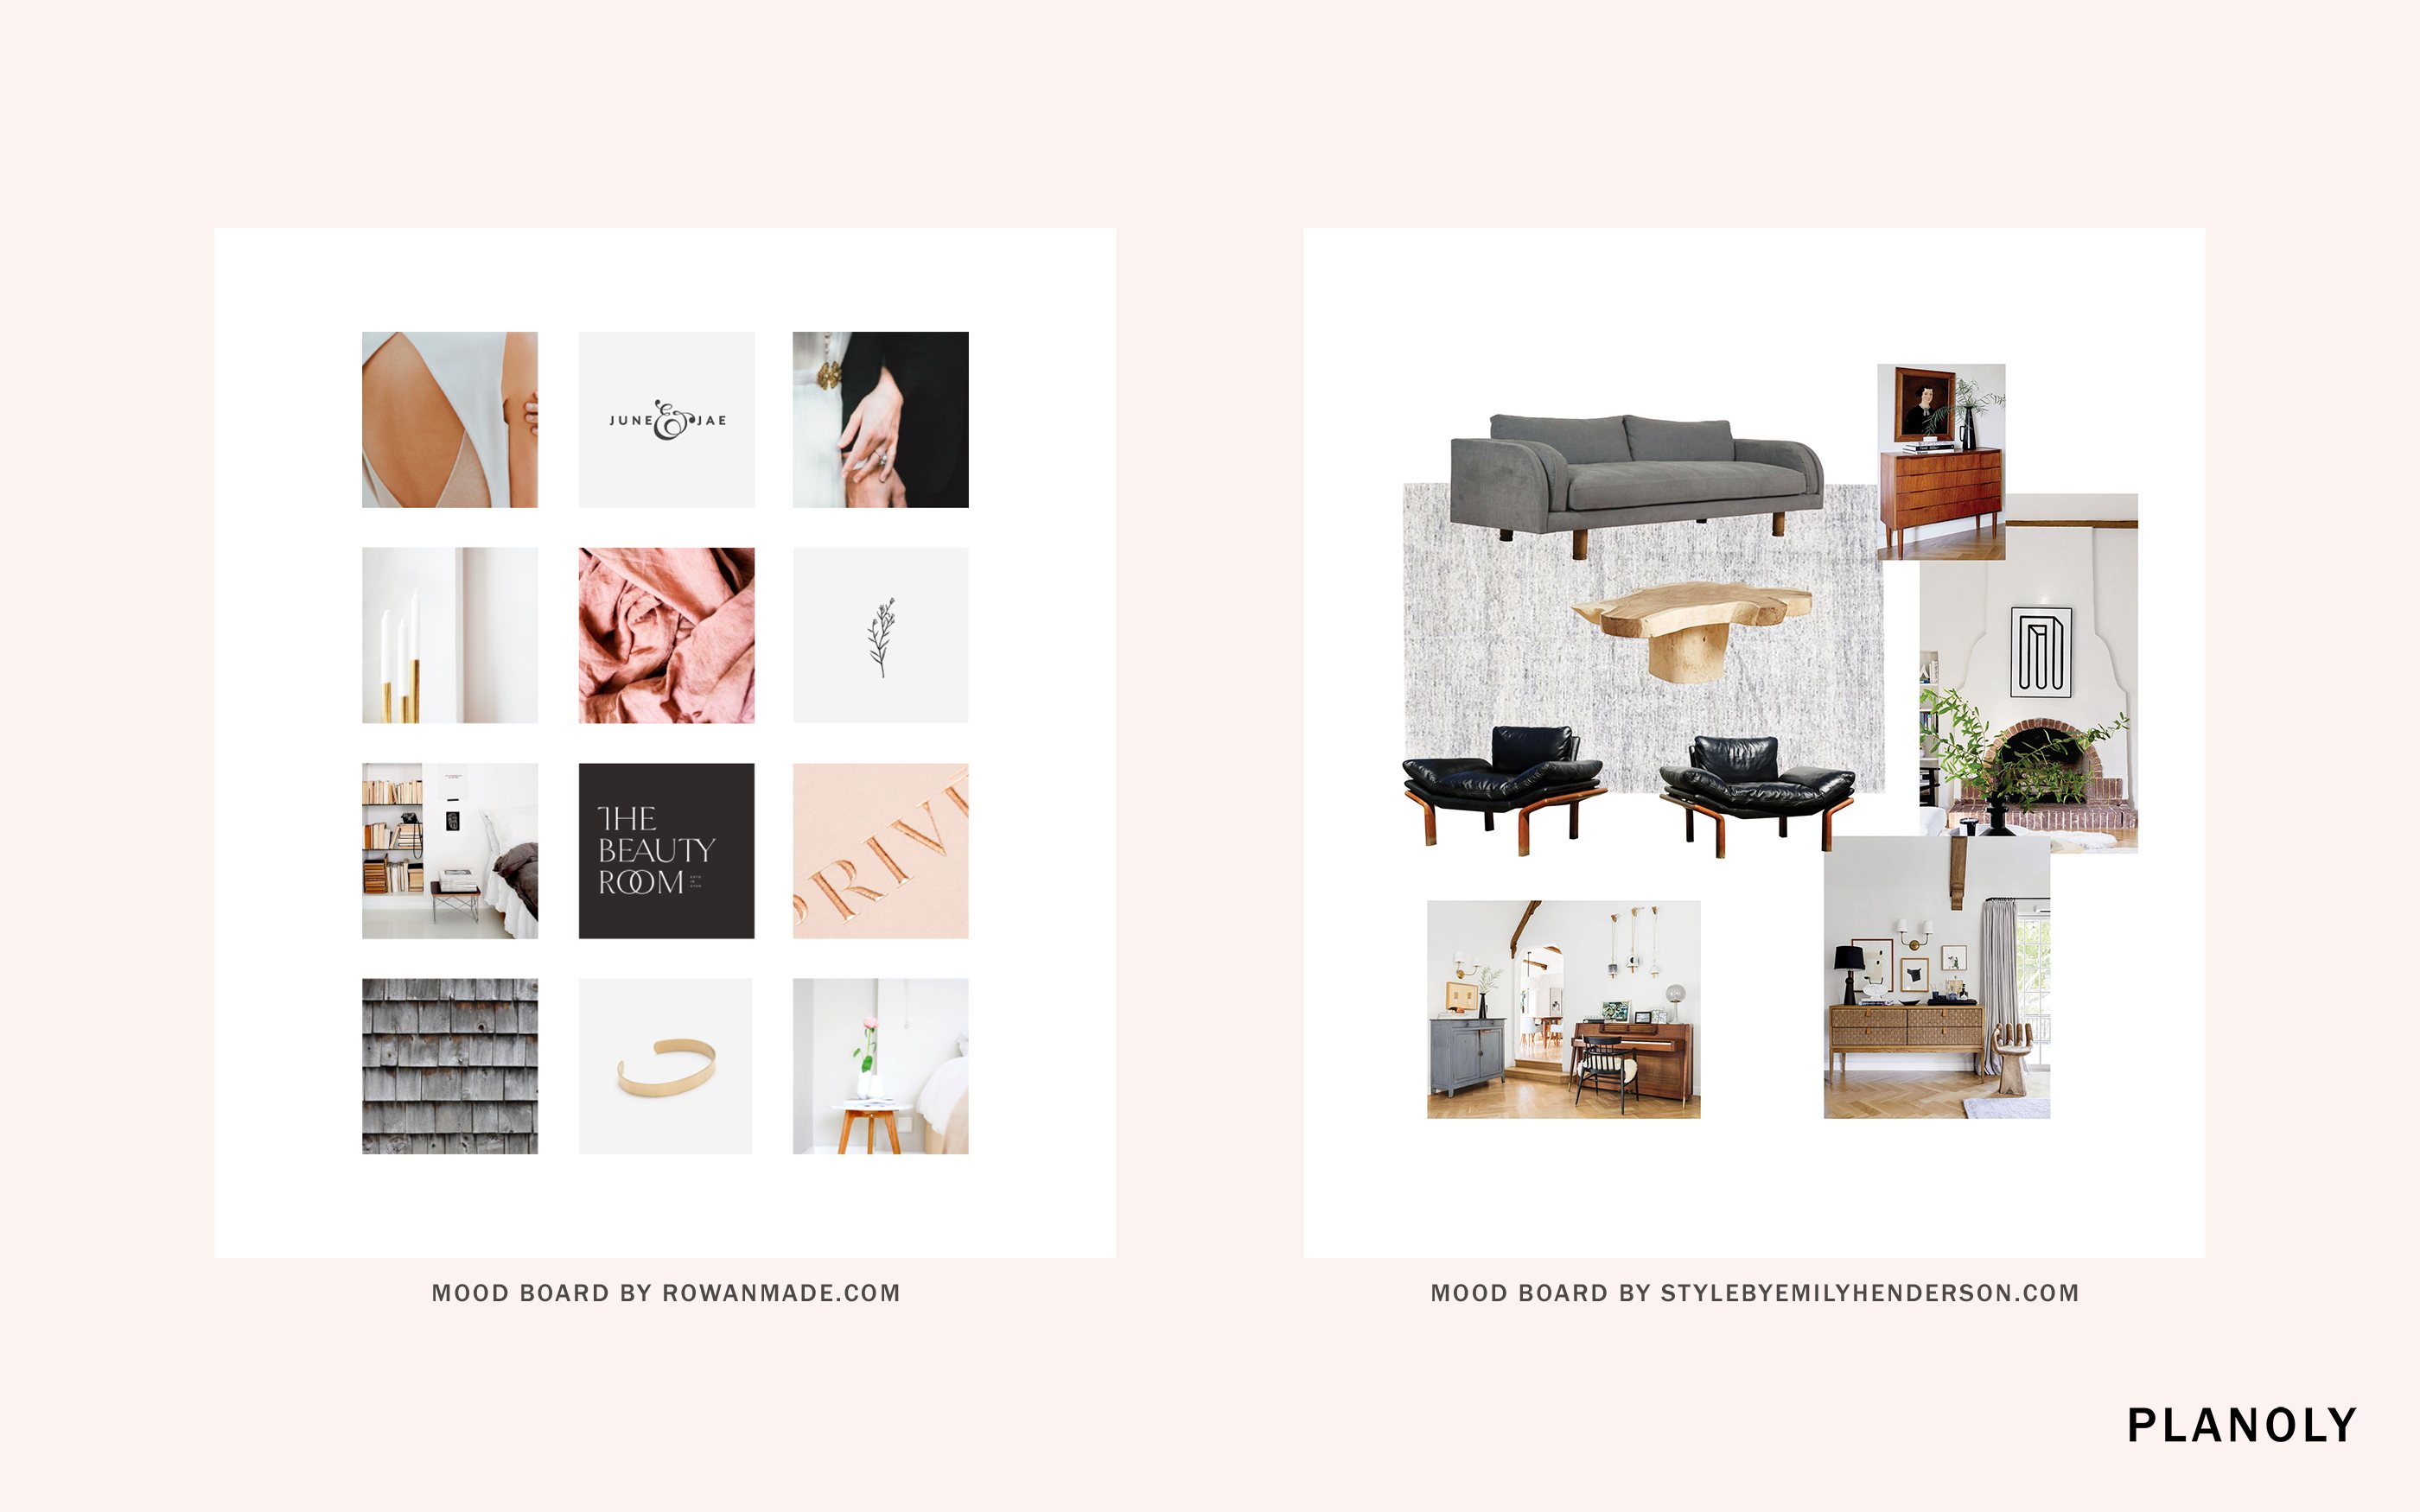 Planoly-Blog-Post-Mood-Board-Collection-StoriesEdit-Image-1